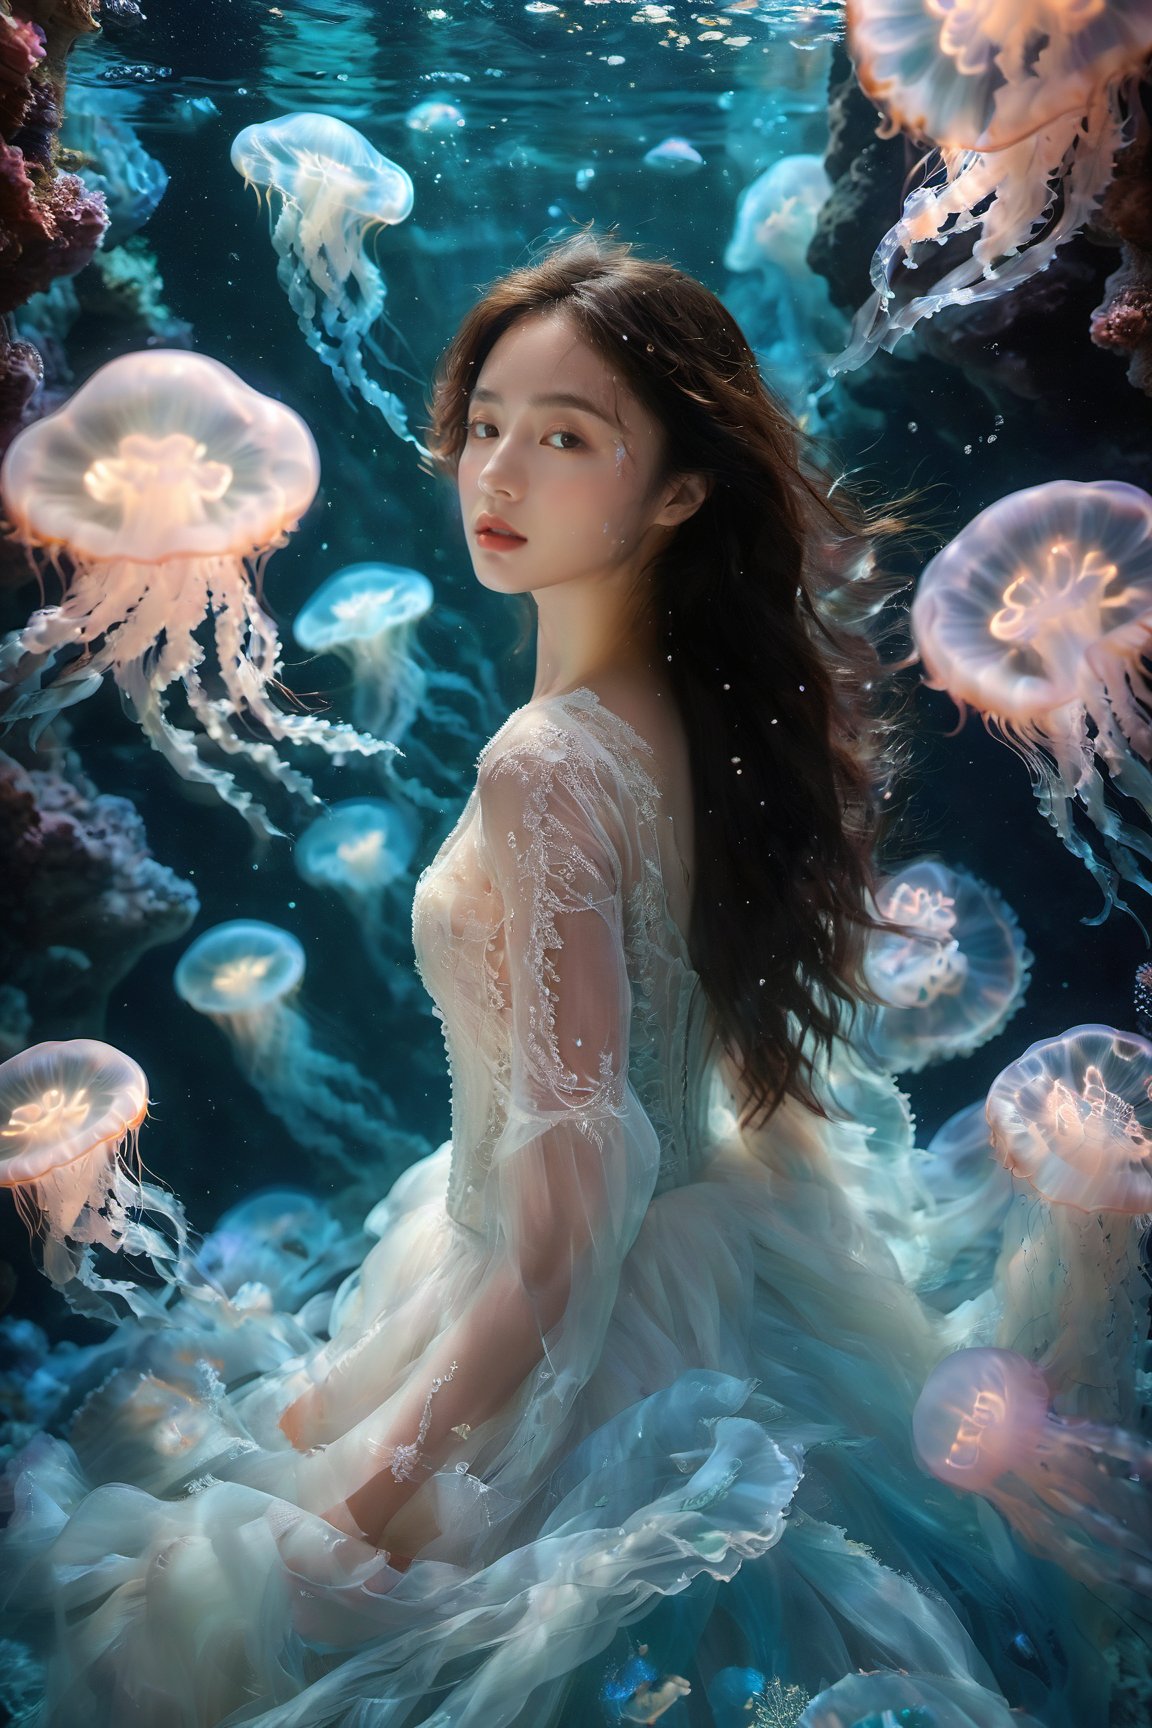 A young woman with long flowing hair, surrounded by an ethereal underwater environment filled with luminescent jellyfish. She wears a delicate white dress adorned with intricate lace patterns. The water is a mesmerizing shade of blue, and the jellyfish appear to be floating gracefully around her, creating a dreamy ambiance.,xxmixgirl